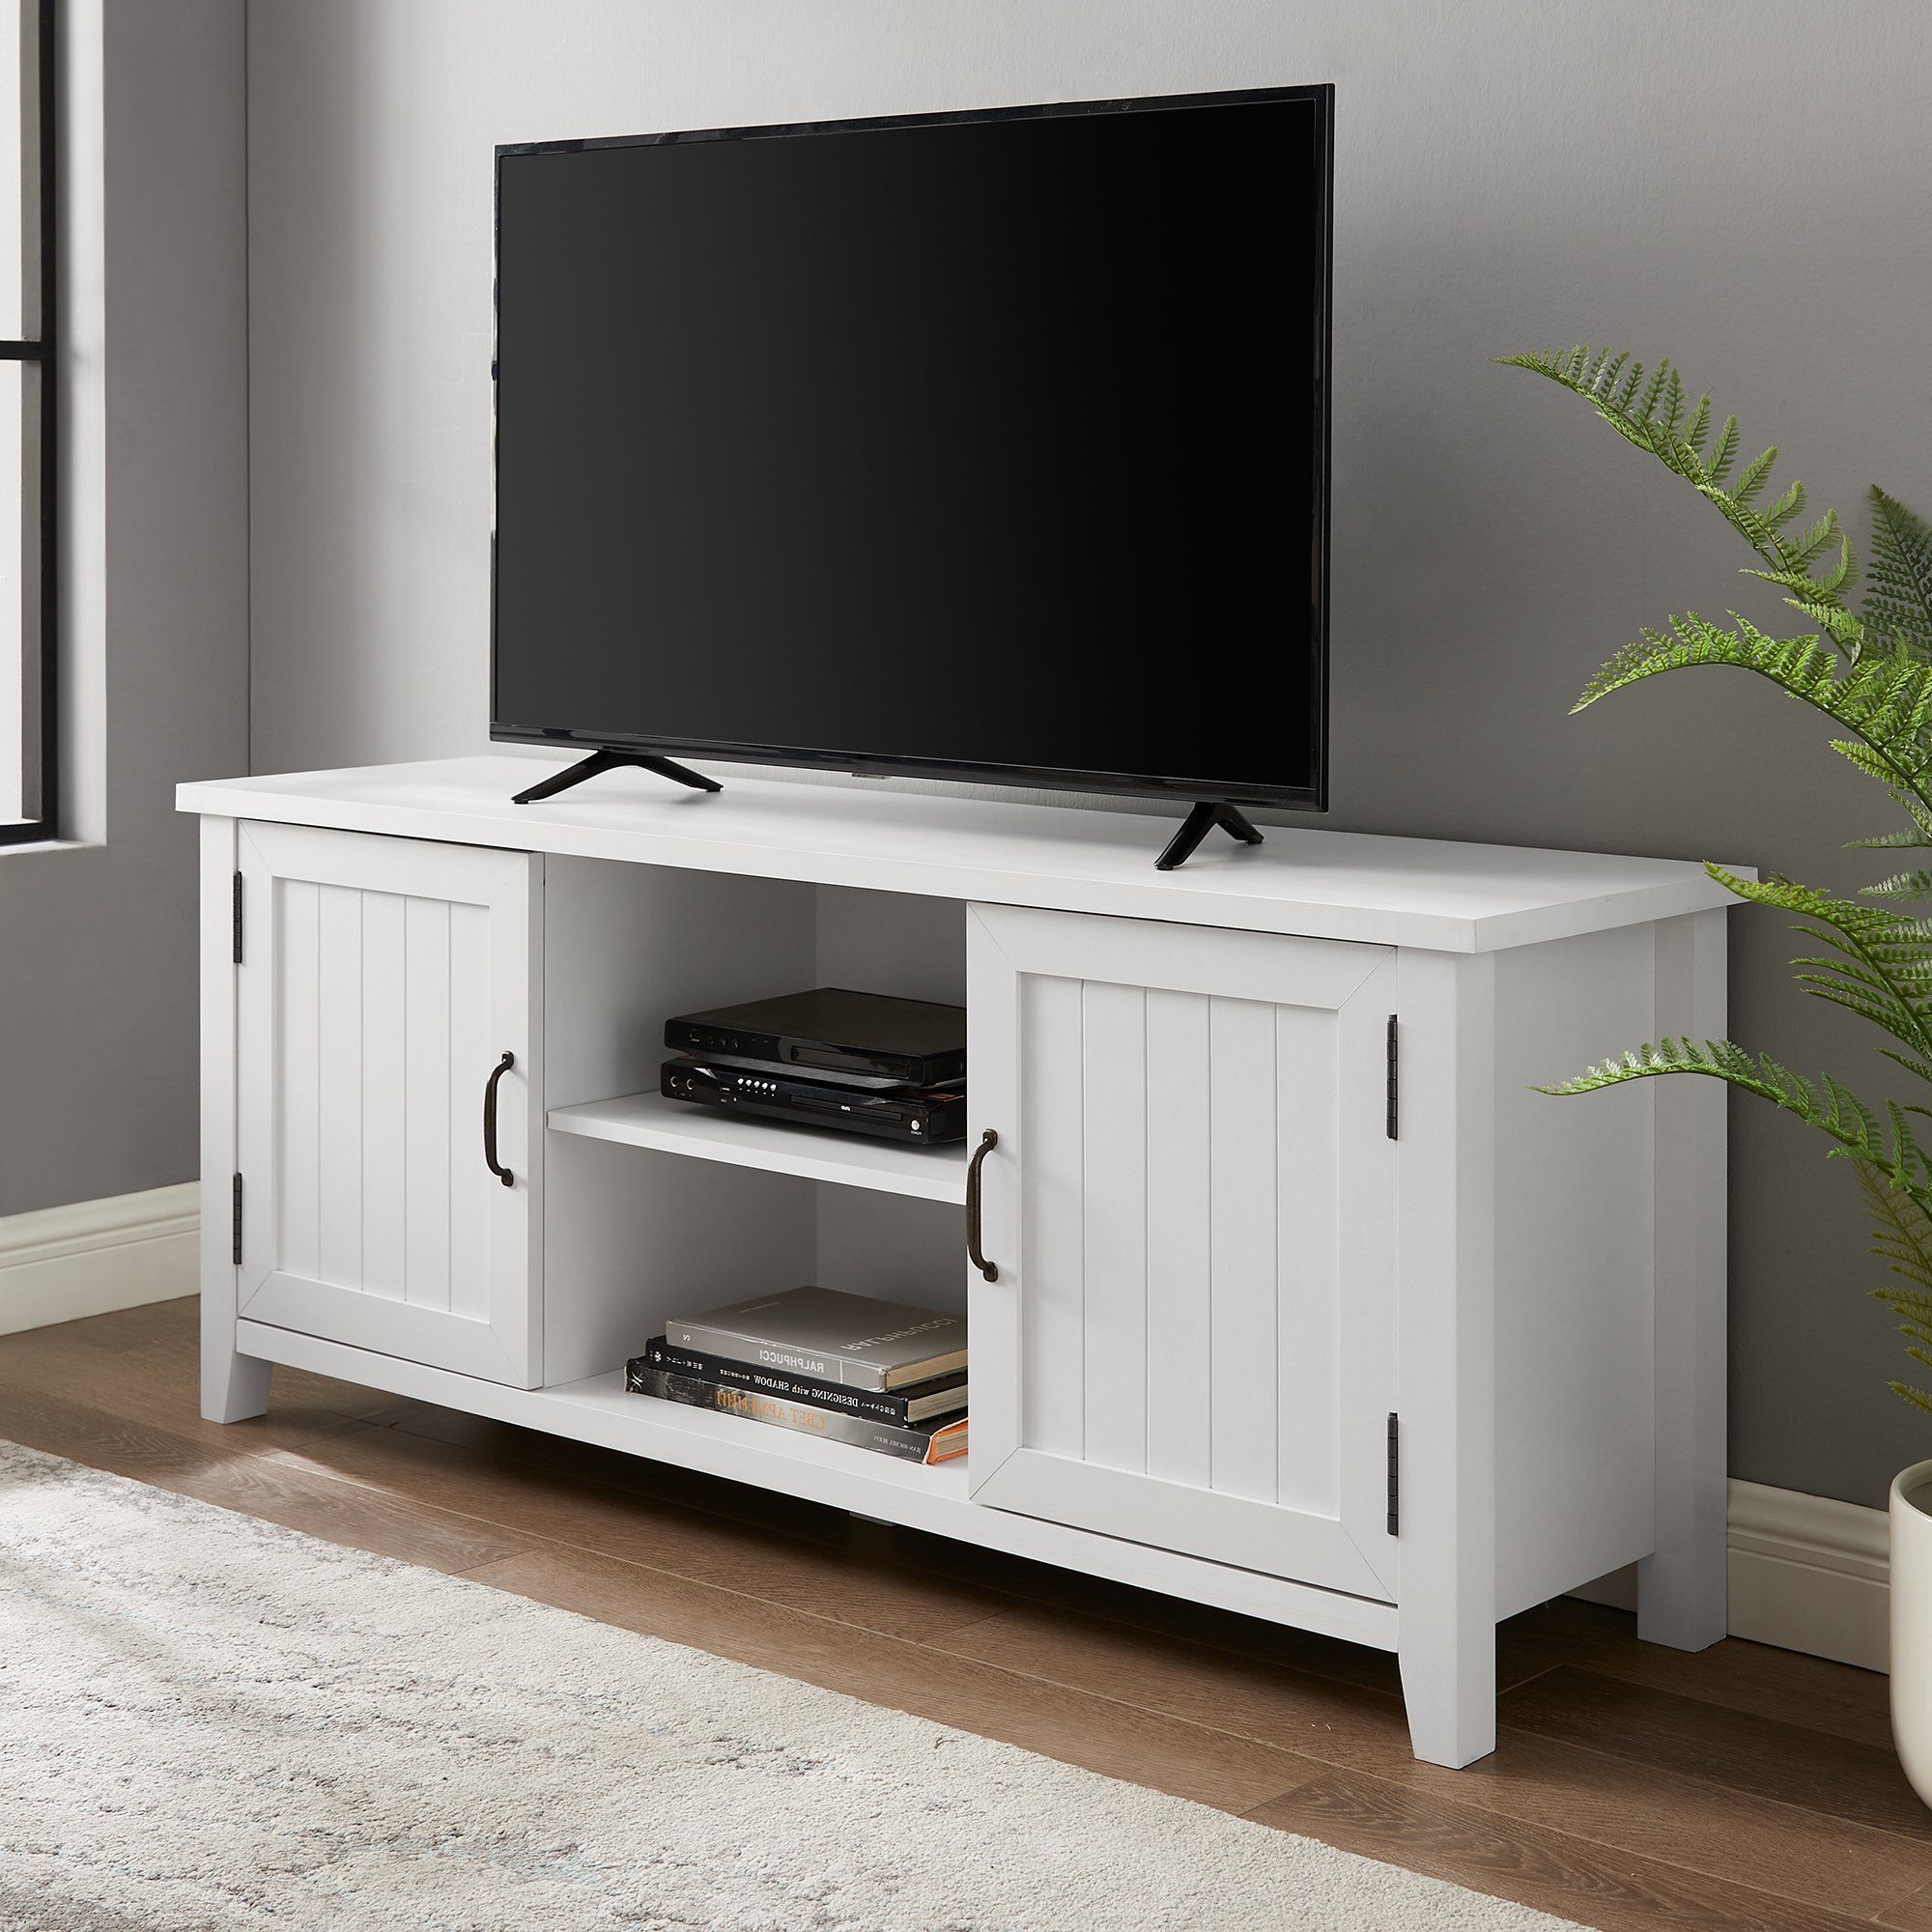 Solid White 58 Inch Grooved Door Tv Stand – Coastal For Walker Edison Farmhouse Tv Stands With Storage Cabinet Doors And Shelves (Gallery 5 of 20)